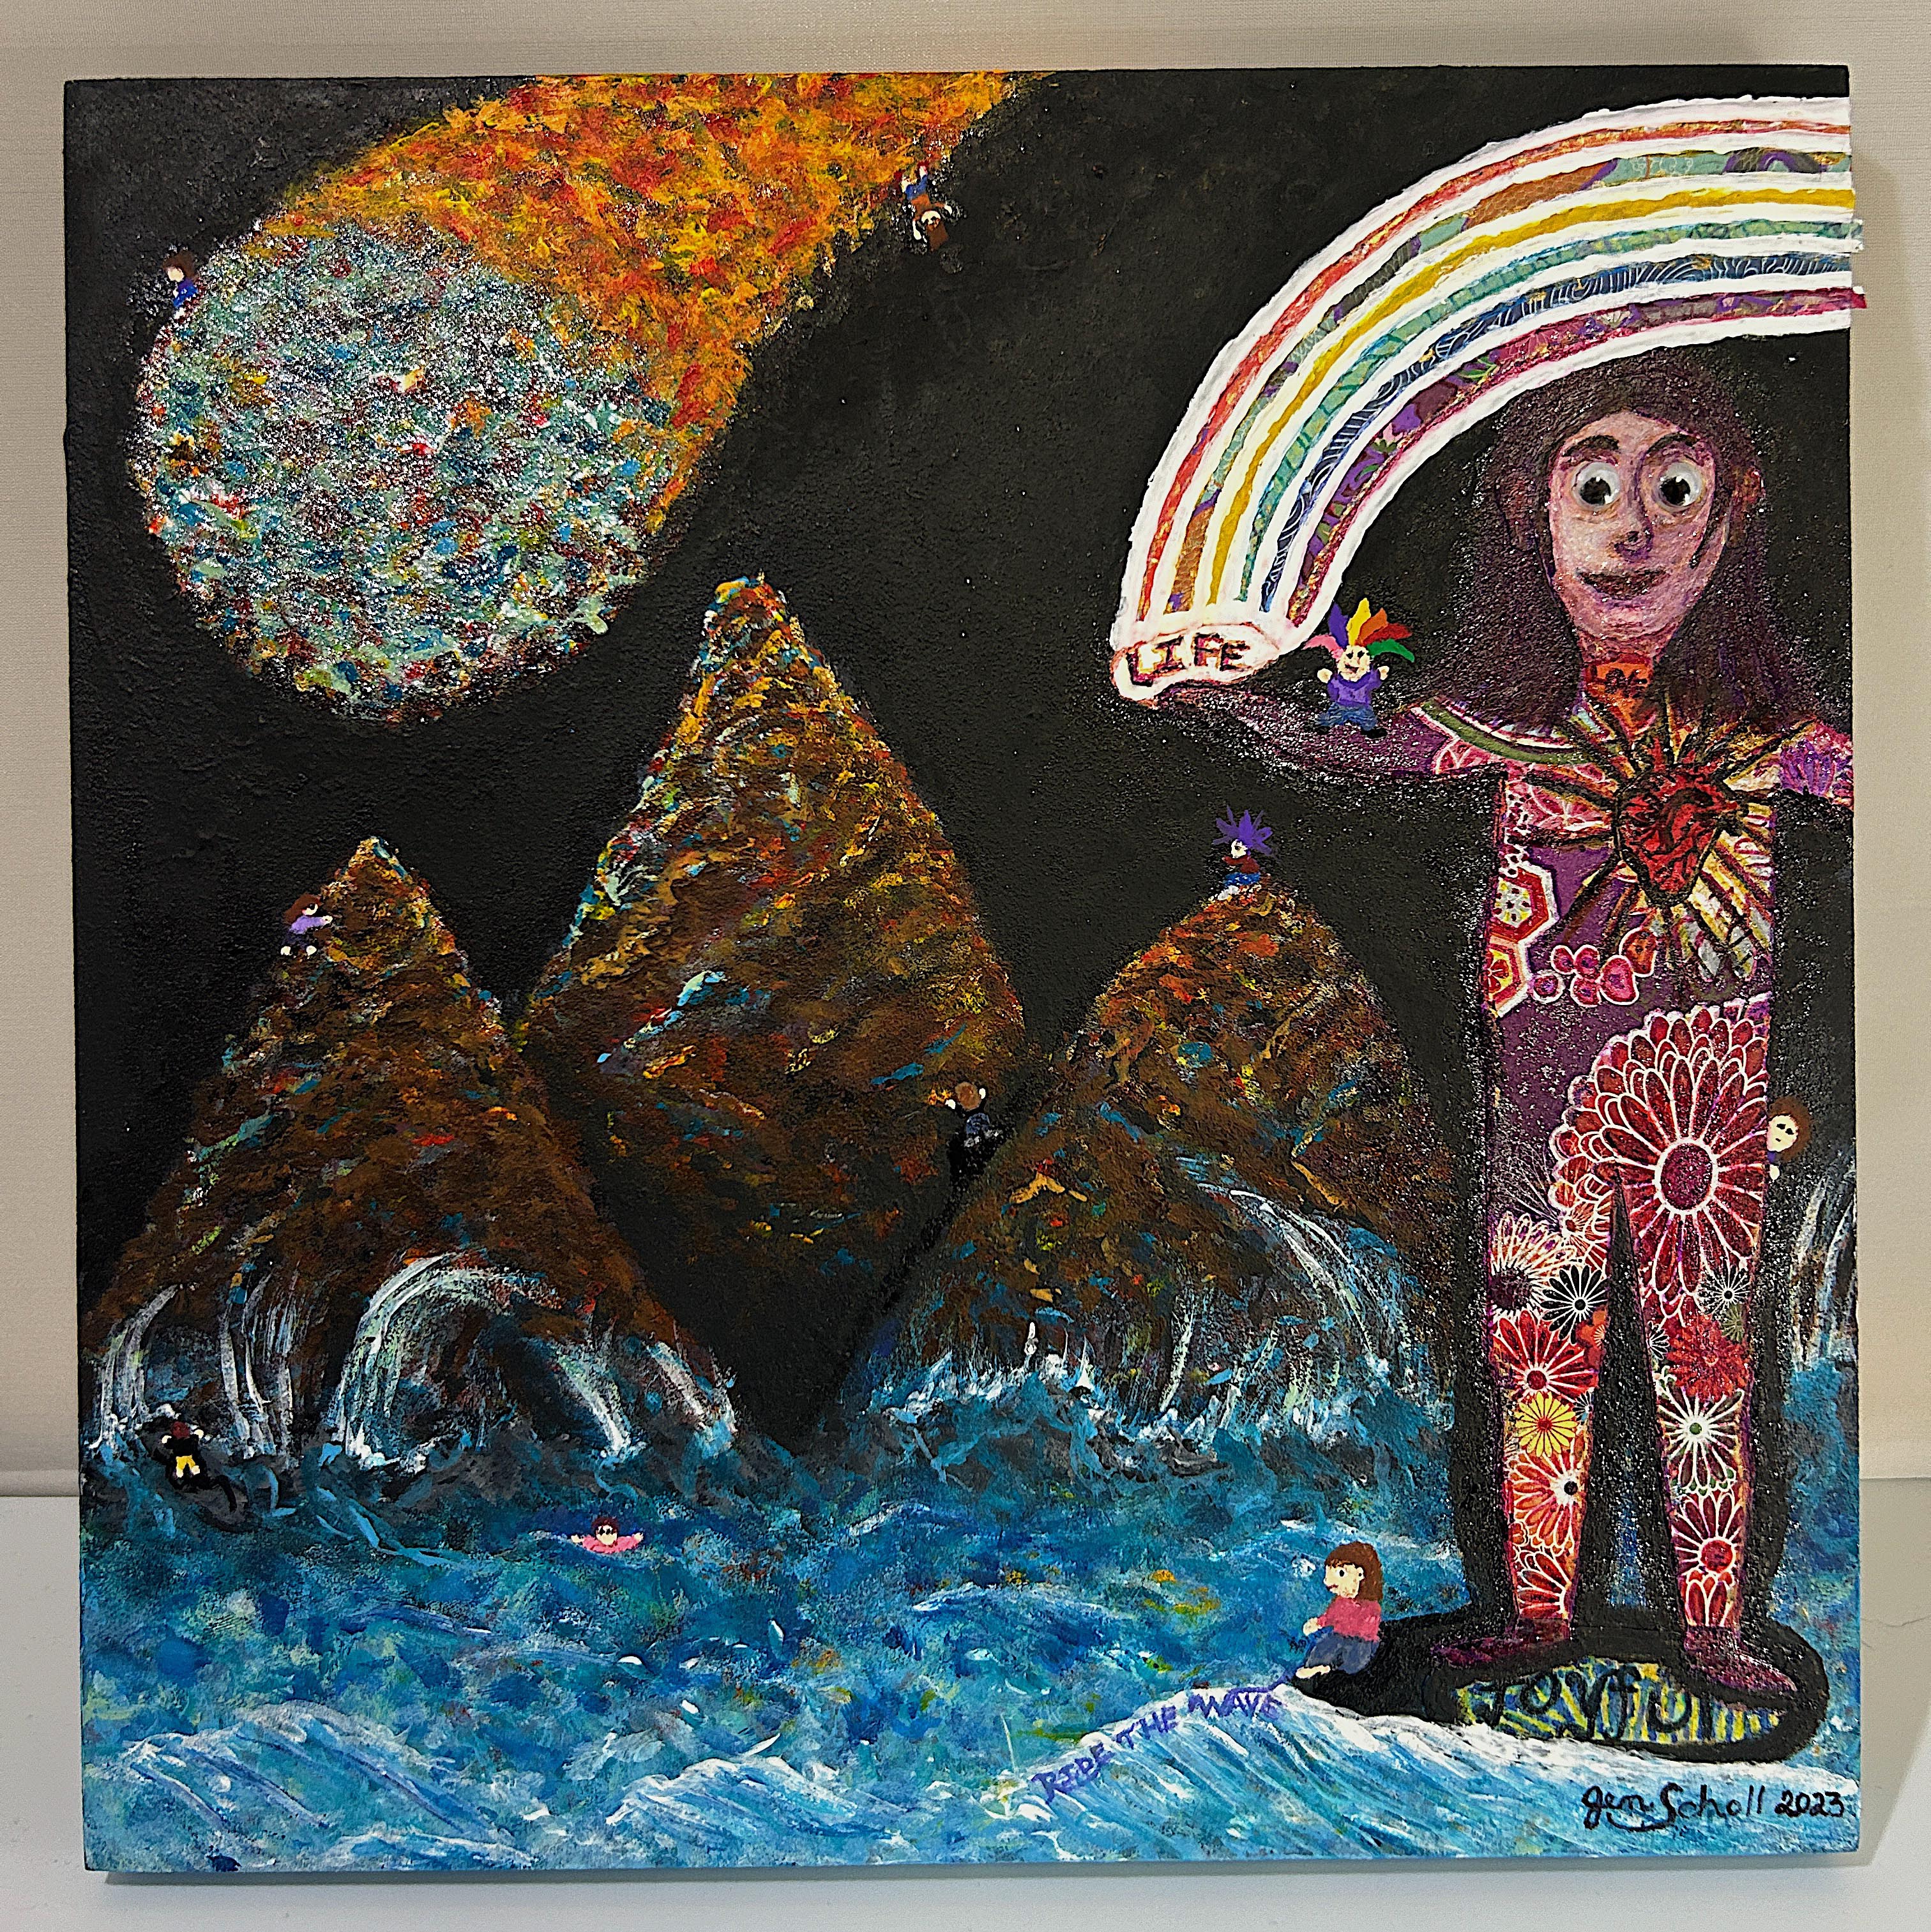 A light-skinned nude figure covered in colorful floral tattoo-like patterns stands on a body of water. In the figure's outstretched arms is a rainbow, in the background lies a mountain range, and in the sky a meteor plummets down towards the entire scene.